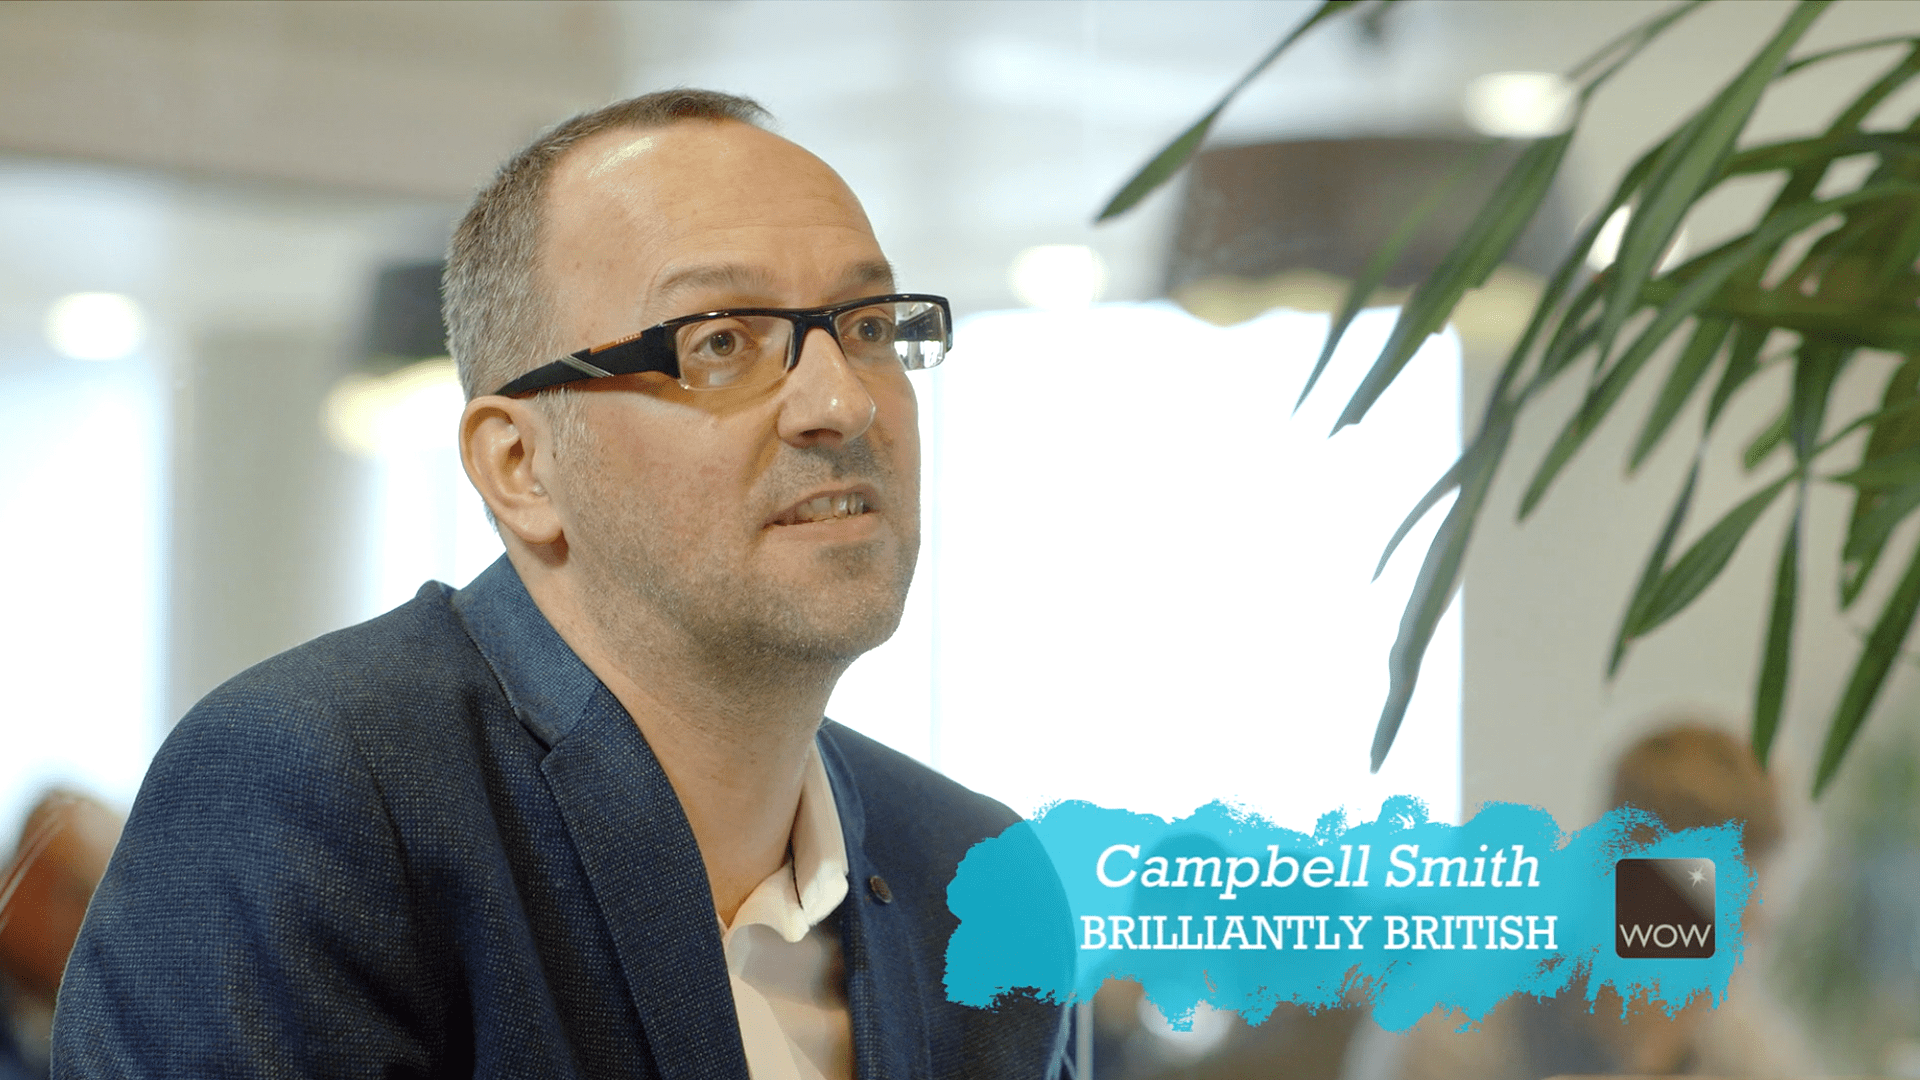 Campbell Smith, Founder at e-commerce retailer Brilliantly British video